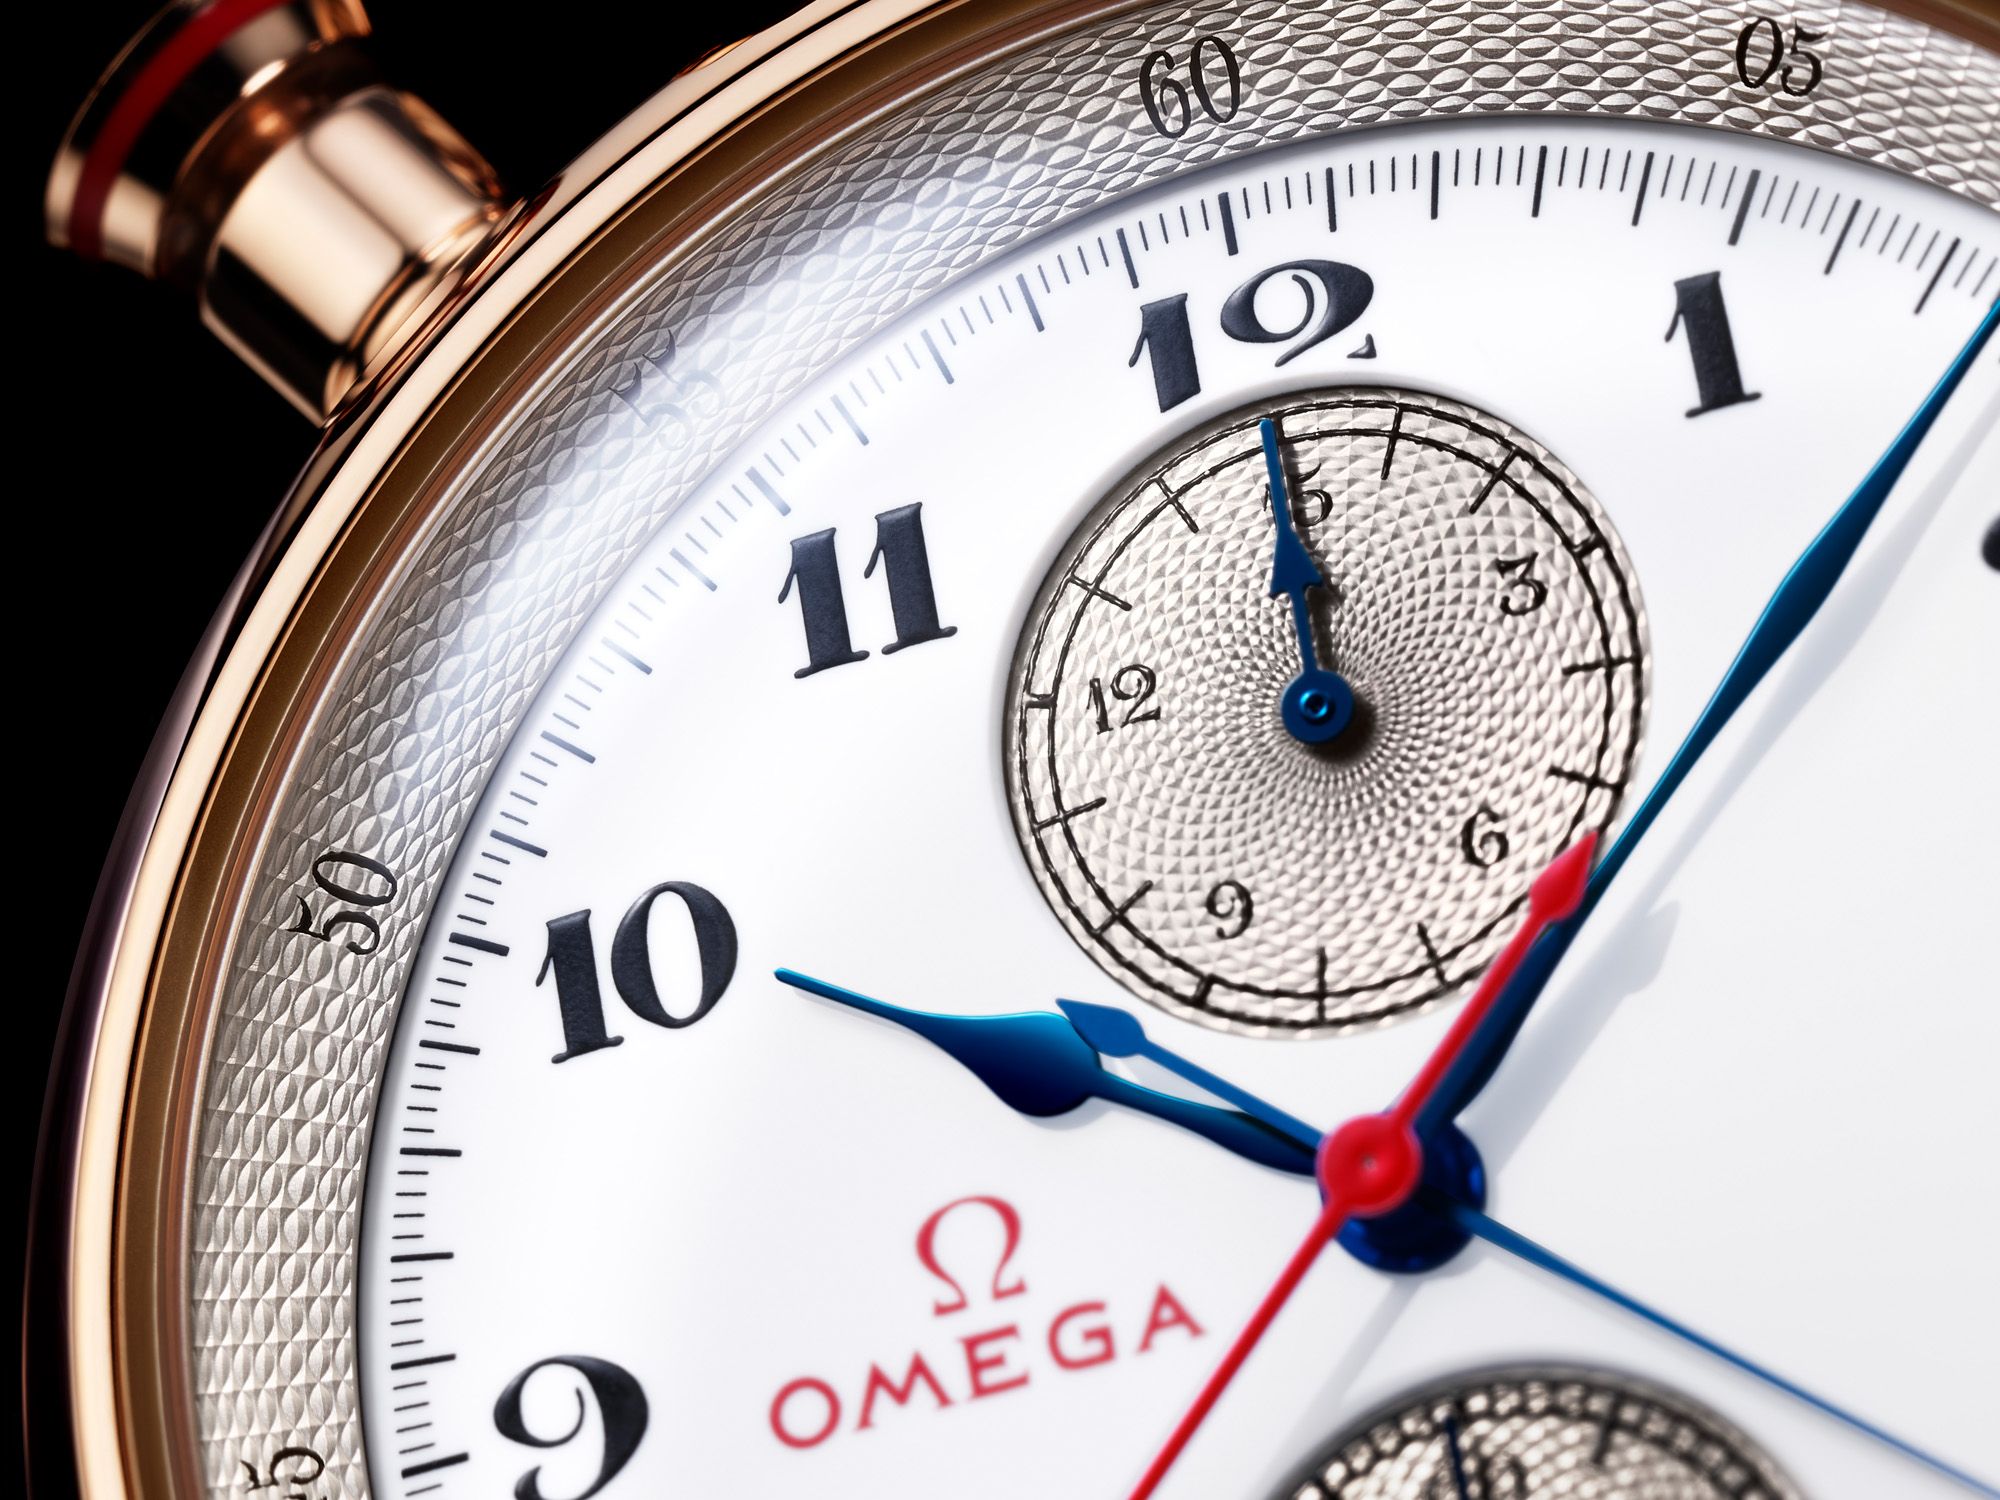 The Omega Speedmaster and Olympic 1932 Chrono Chime